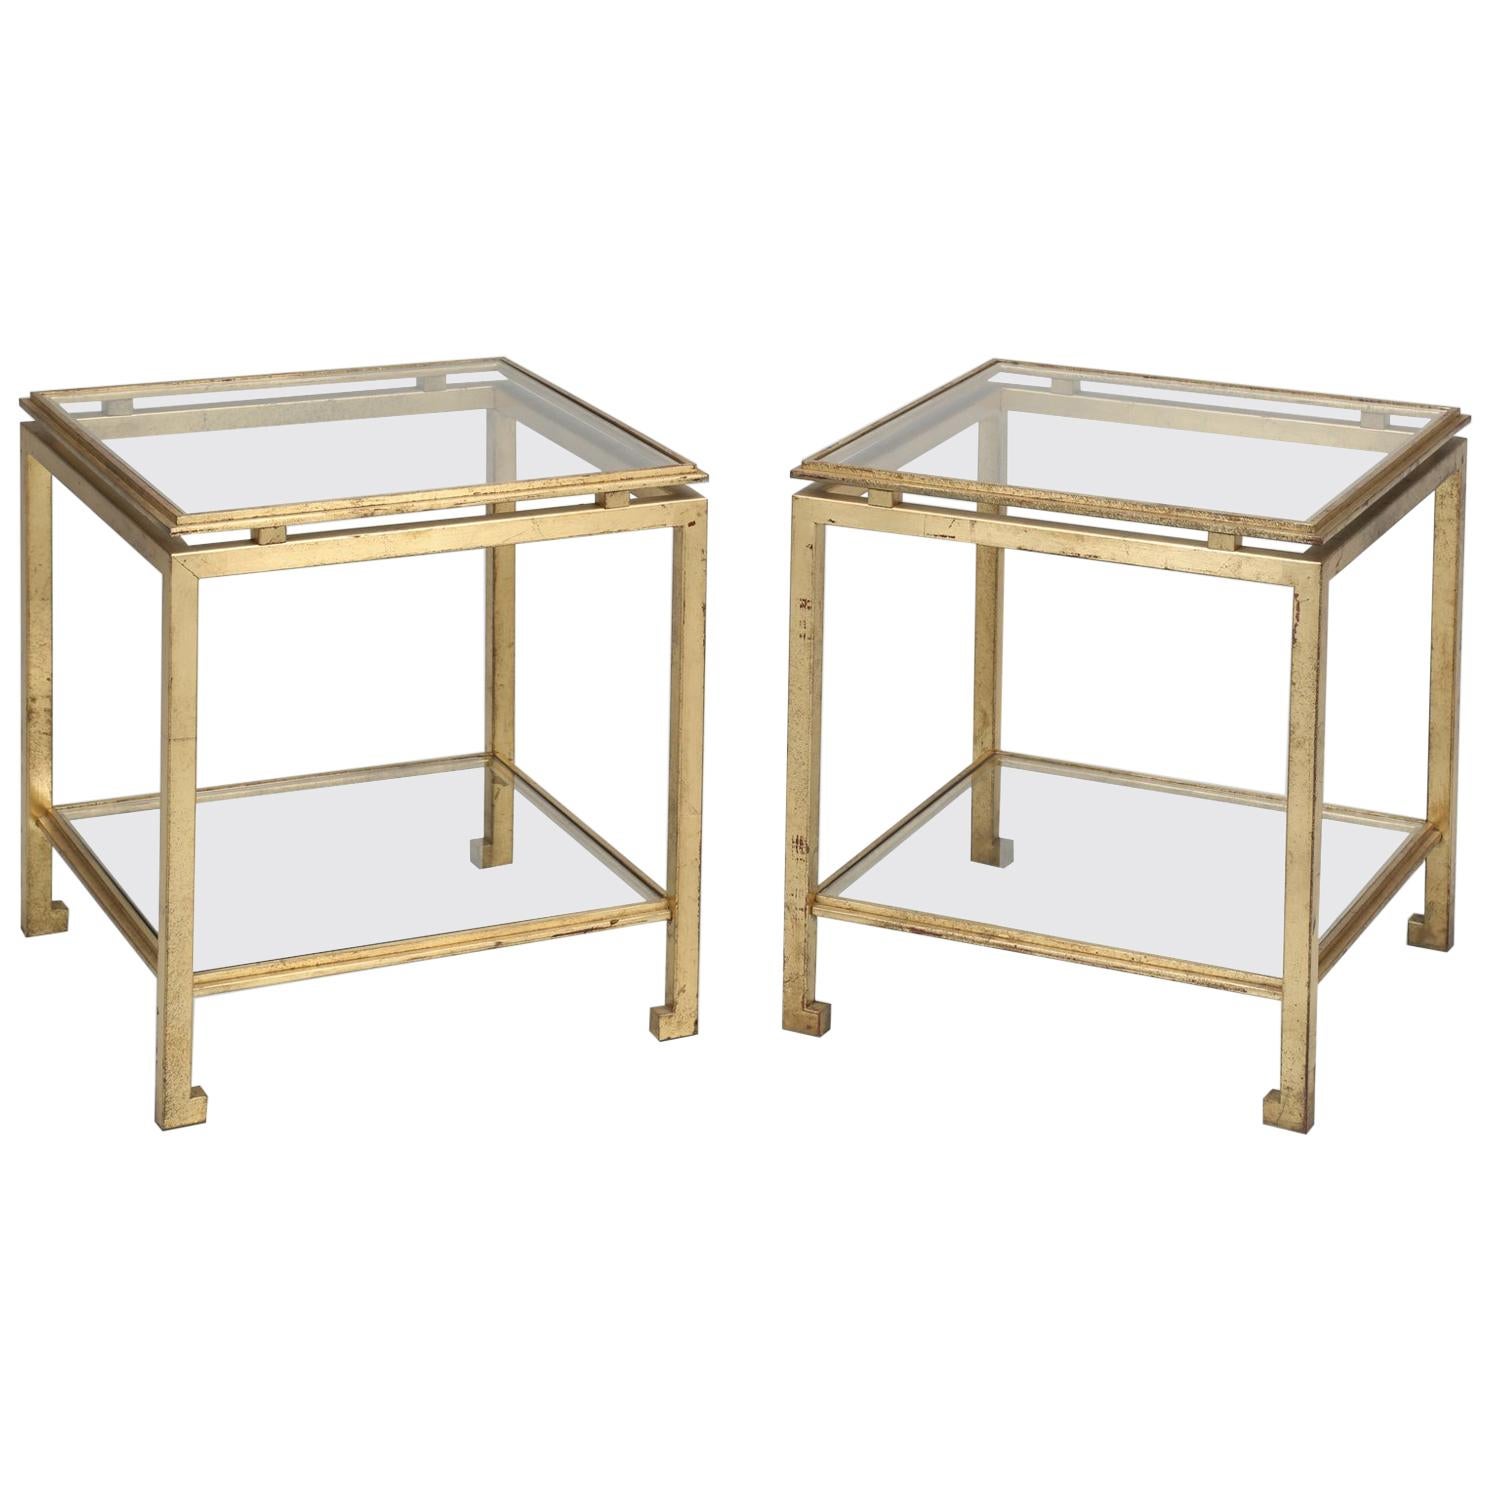 Pair of End or Side Tables Attributed to Guy Lefevre Design, for Maison Jansen